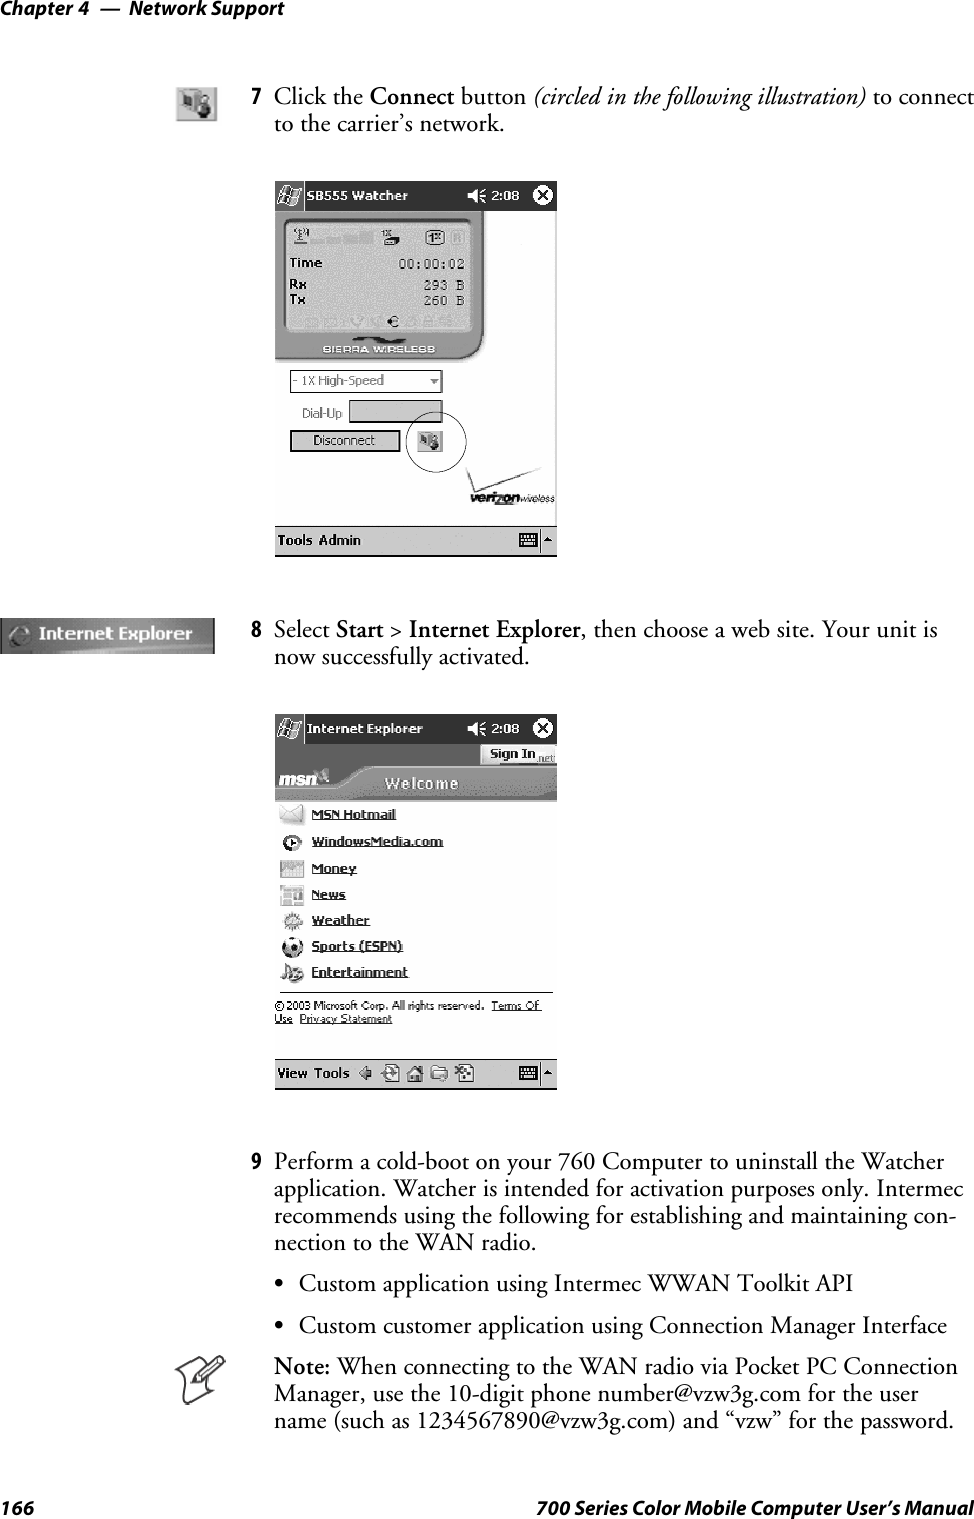 Network SupportChapter —4166 700 Series Color Mobile Computer User’s Manual7Click the Connect button (circled in the following illustration) to connectto the carrier’s network.8Select Start &gt;Internet Explorer, then choose a web site. Your unit isnow successfully activated.9Perform a cold-boot on your 760 Computer to uninstall the Watcherapplication. Watcher is intended for activation purposes only. Intermecrecommends using the following for establishing and maintaining con-nection to the WAN radio.SCustom application using Intermec WWAN Toolkit APISCustom customer application using Connection Manager InterfaceNote: When connecting to the WAN radio via Pocket PC ConnectionManager, use the 10-digit phone number@vzw3g.com for the username (such as 1234567890@vzw3g.com) and “vzw” for the password.